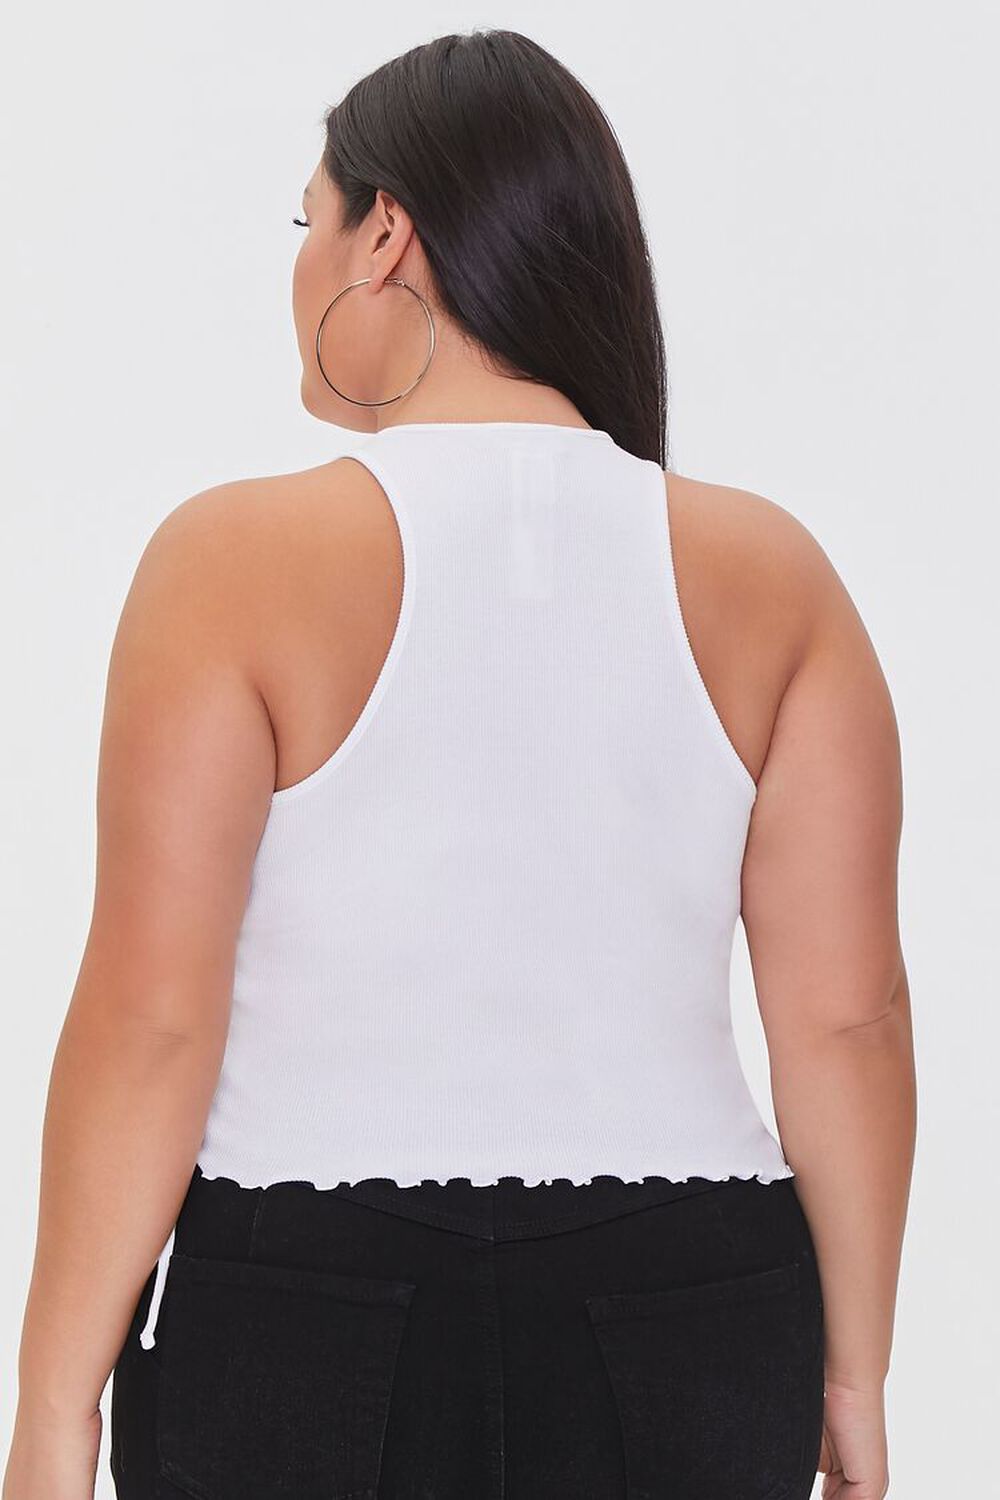 Plus Size Lucky Me Graphic Tank Top, image 3